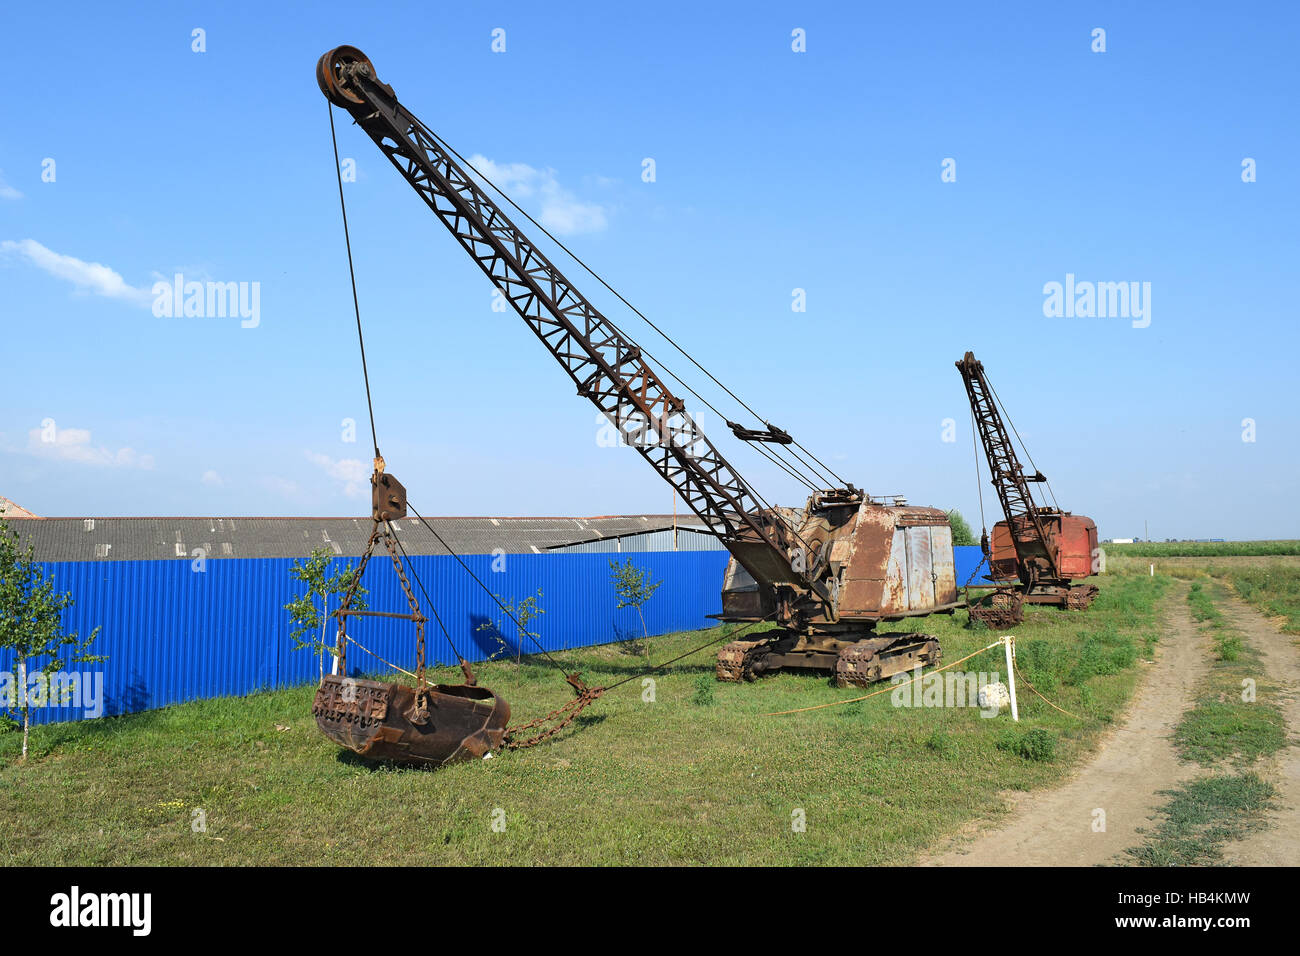 Old dragline near the blue fence Stock Photo